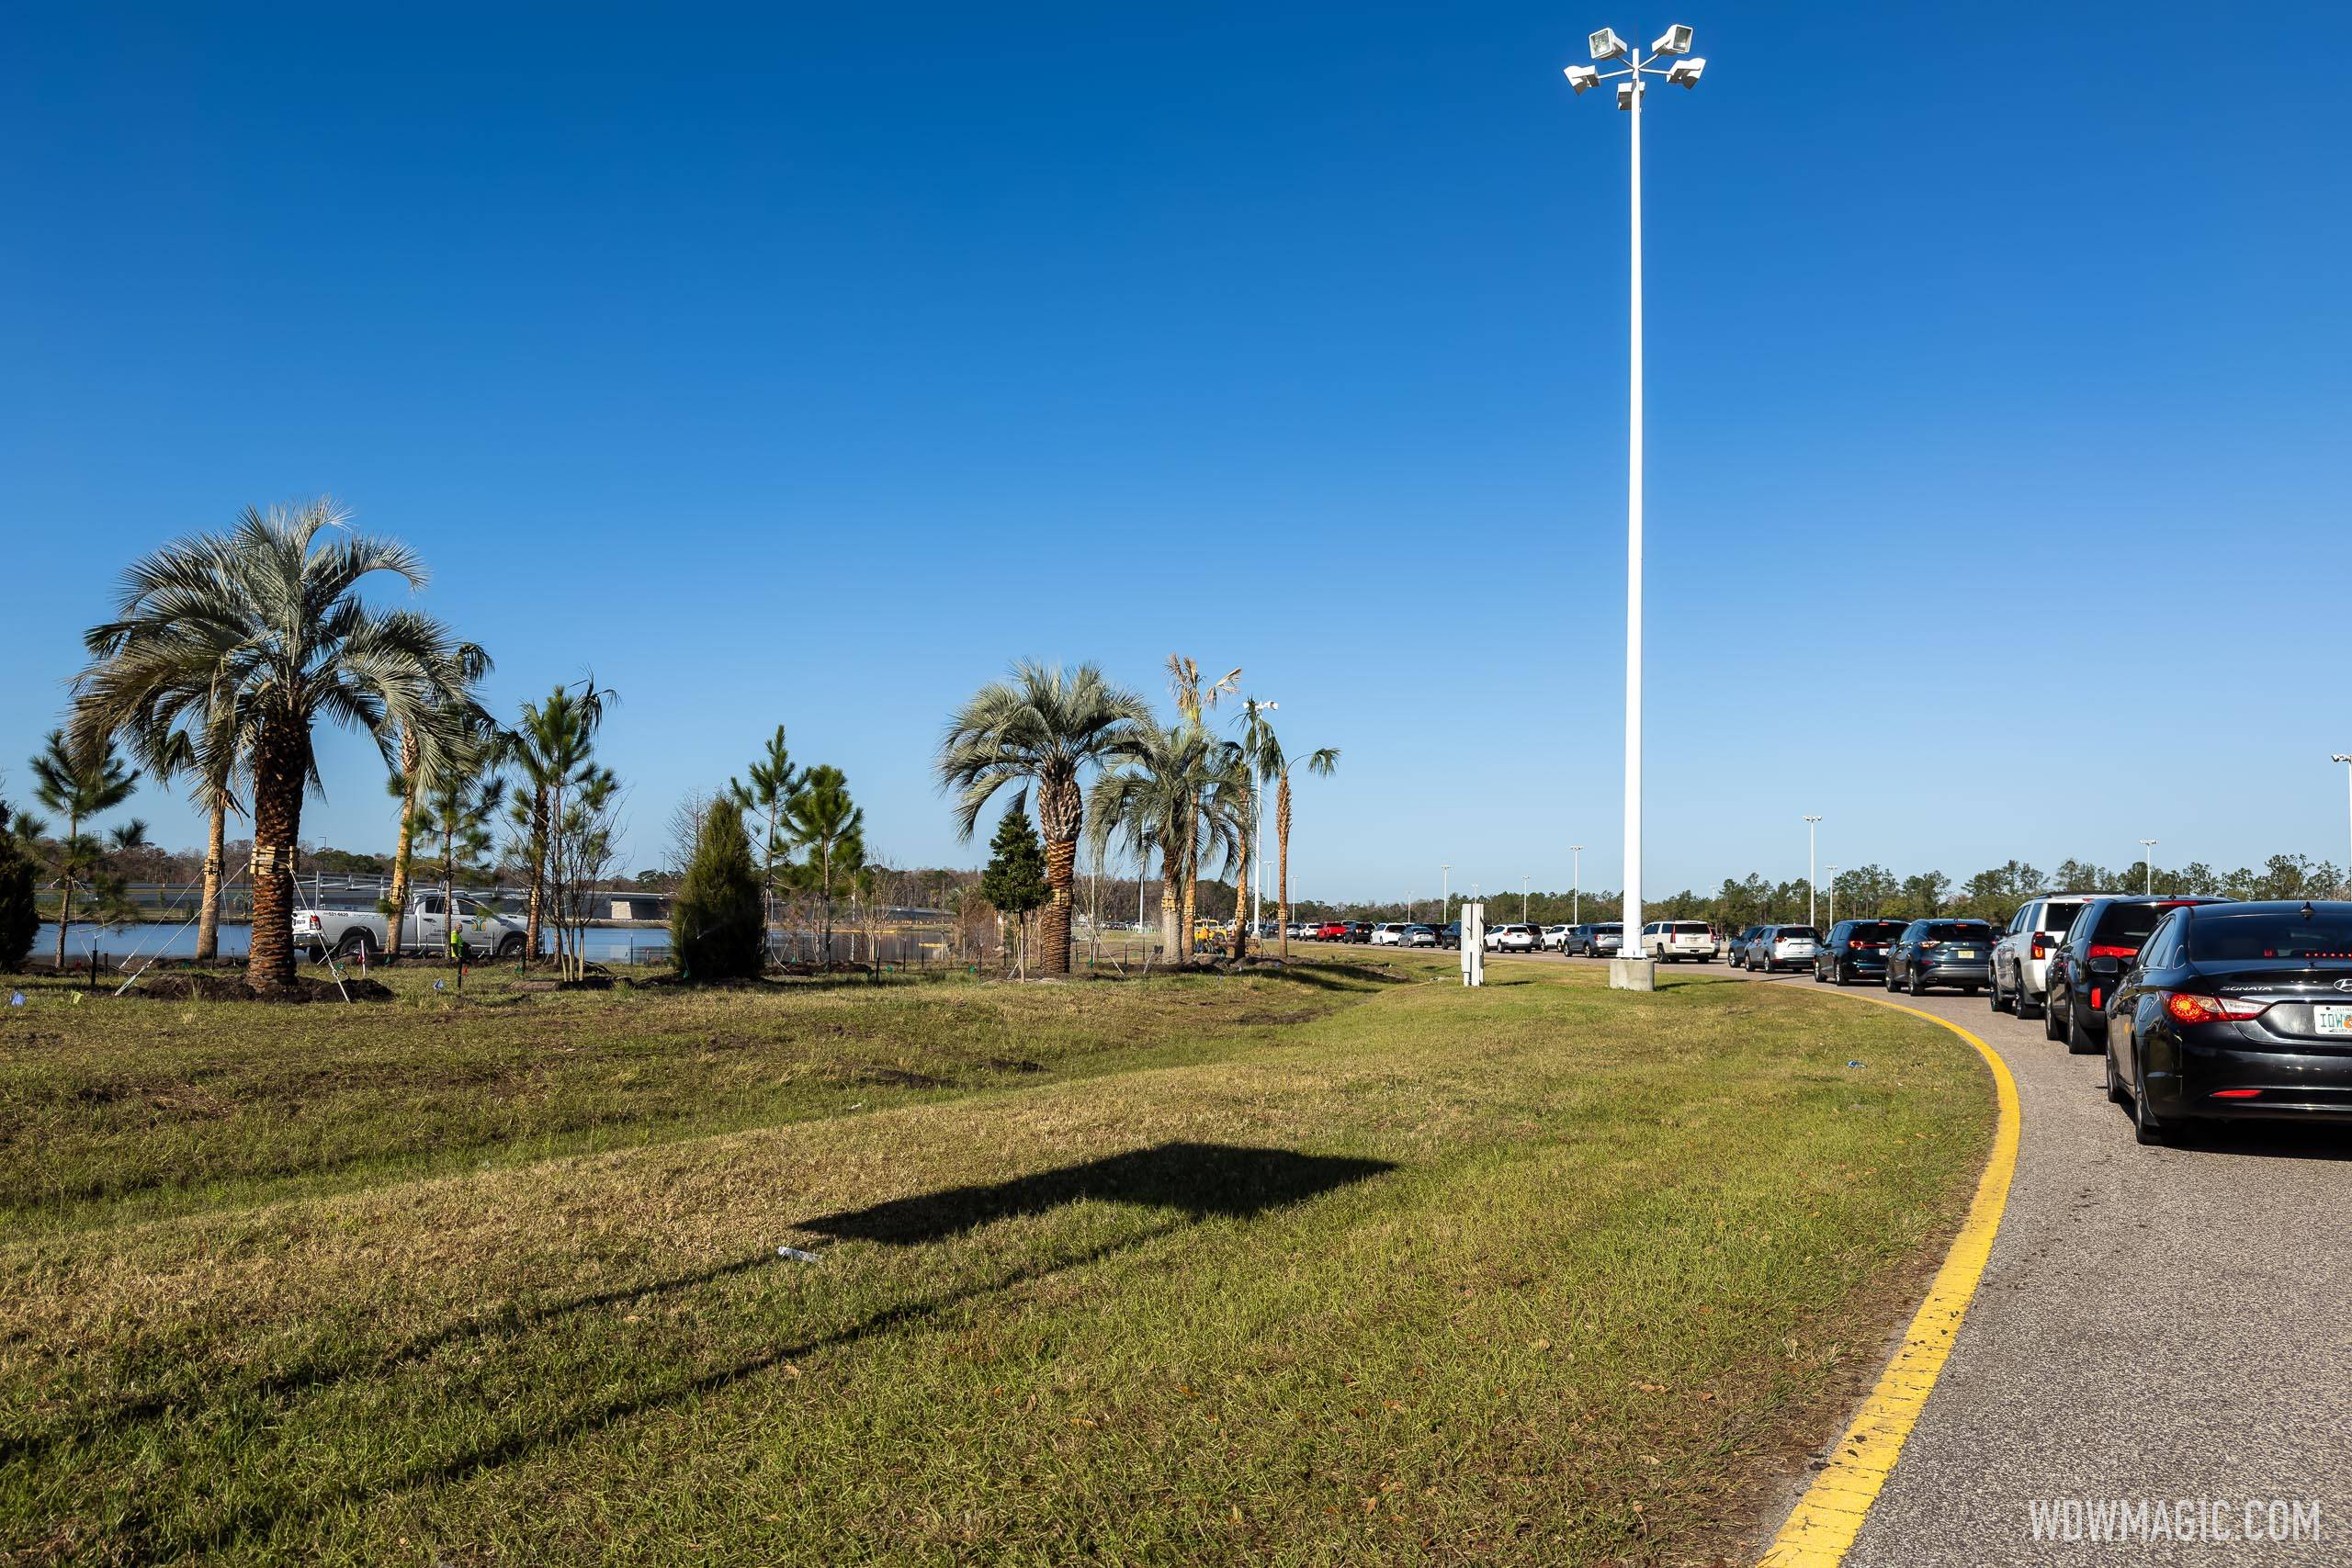 New landscaping comes to Walt Disney World's Transportation and Ticket Center